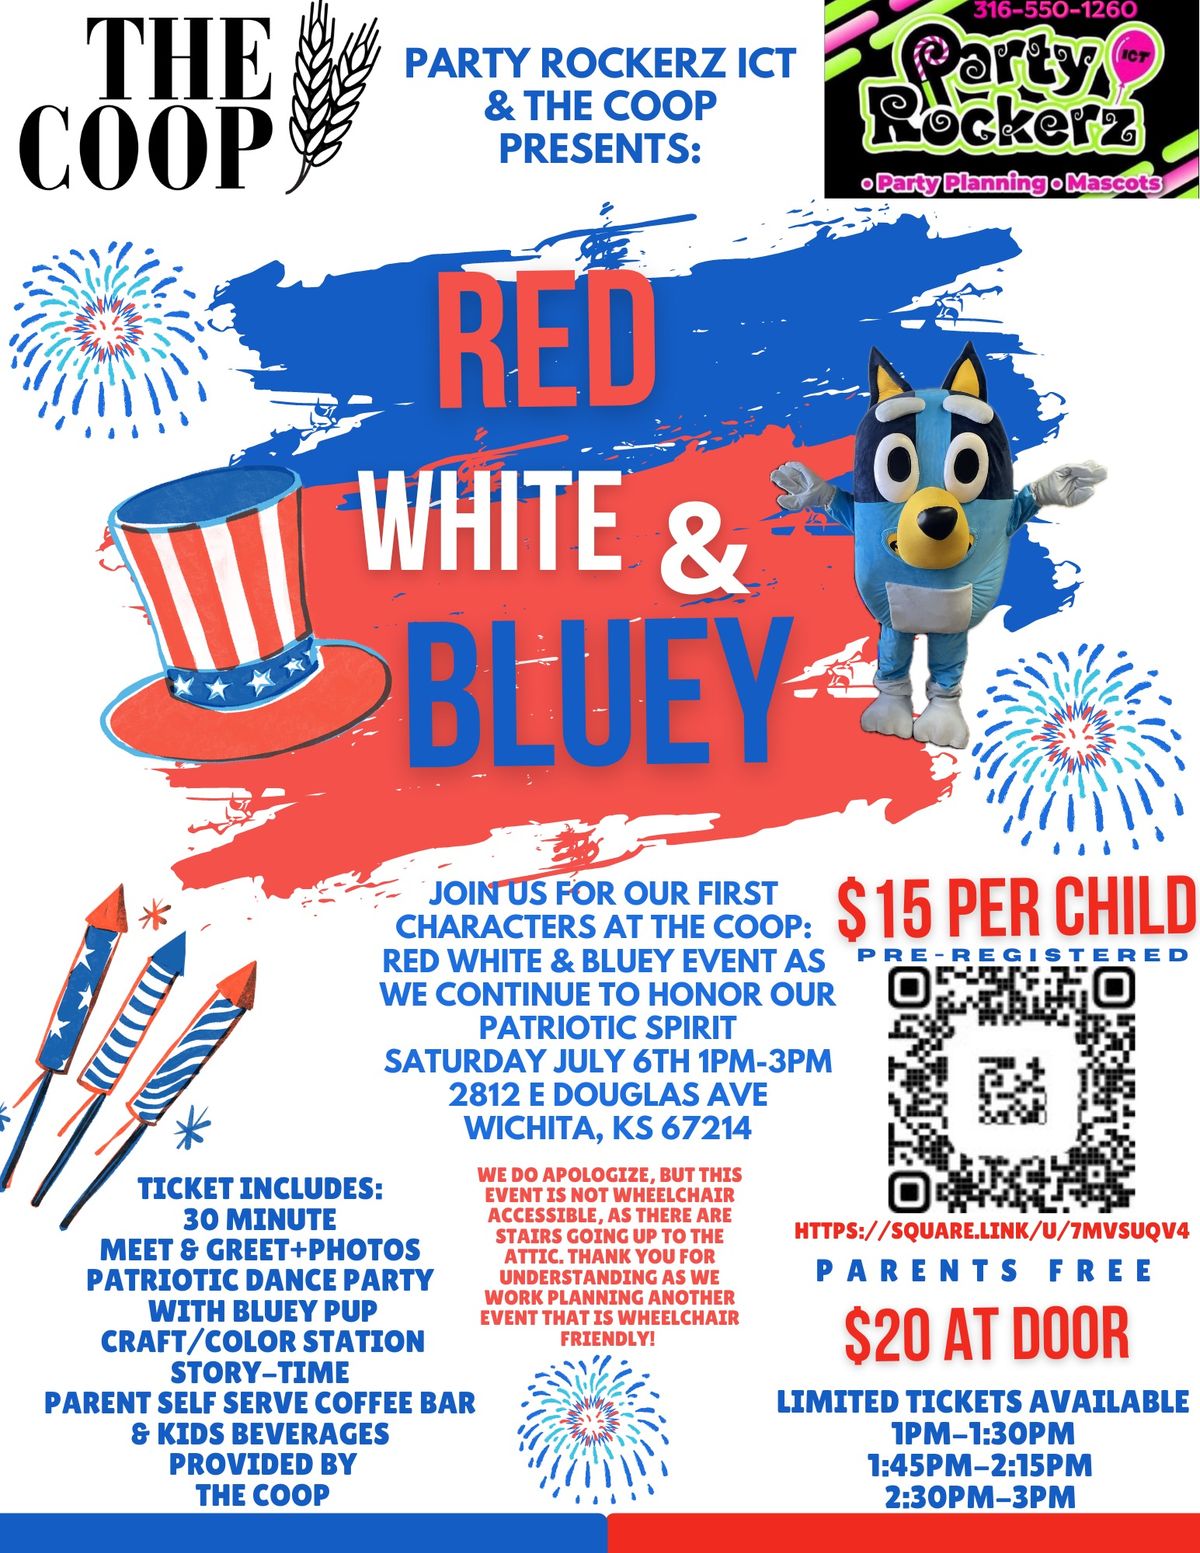 RED WHITE & BLUEY-CHARACTERS AT THE COOP-Party Rockerz ICT